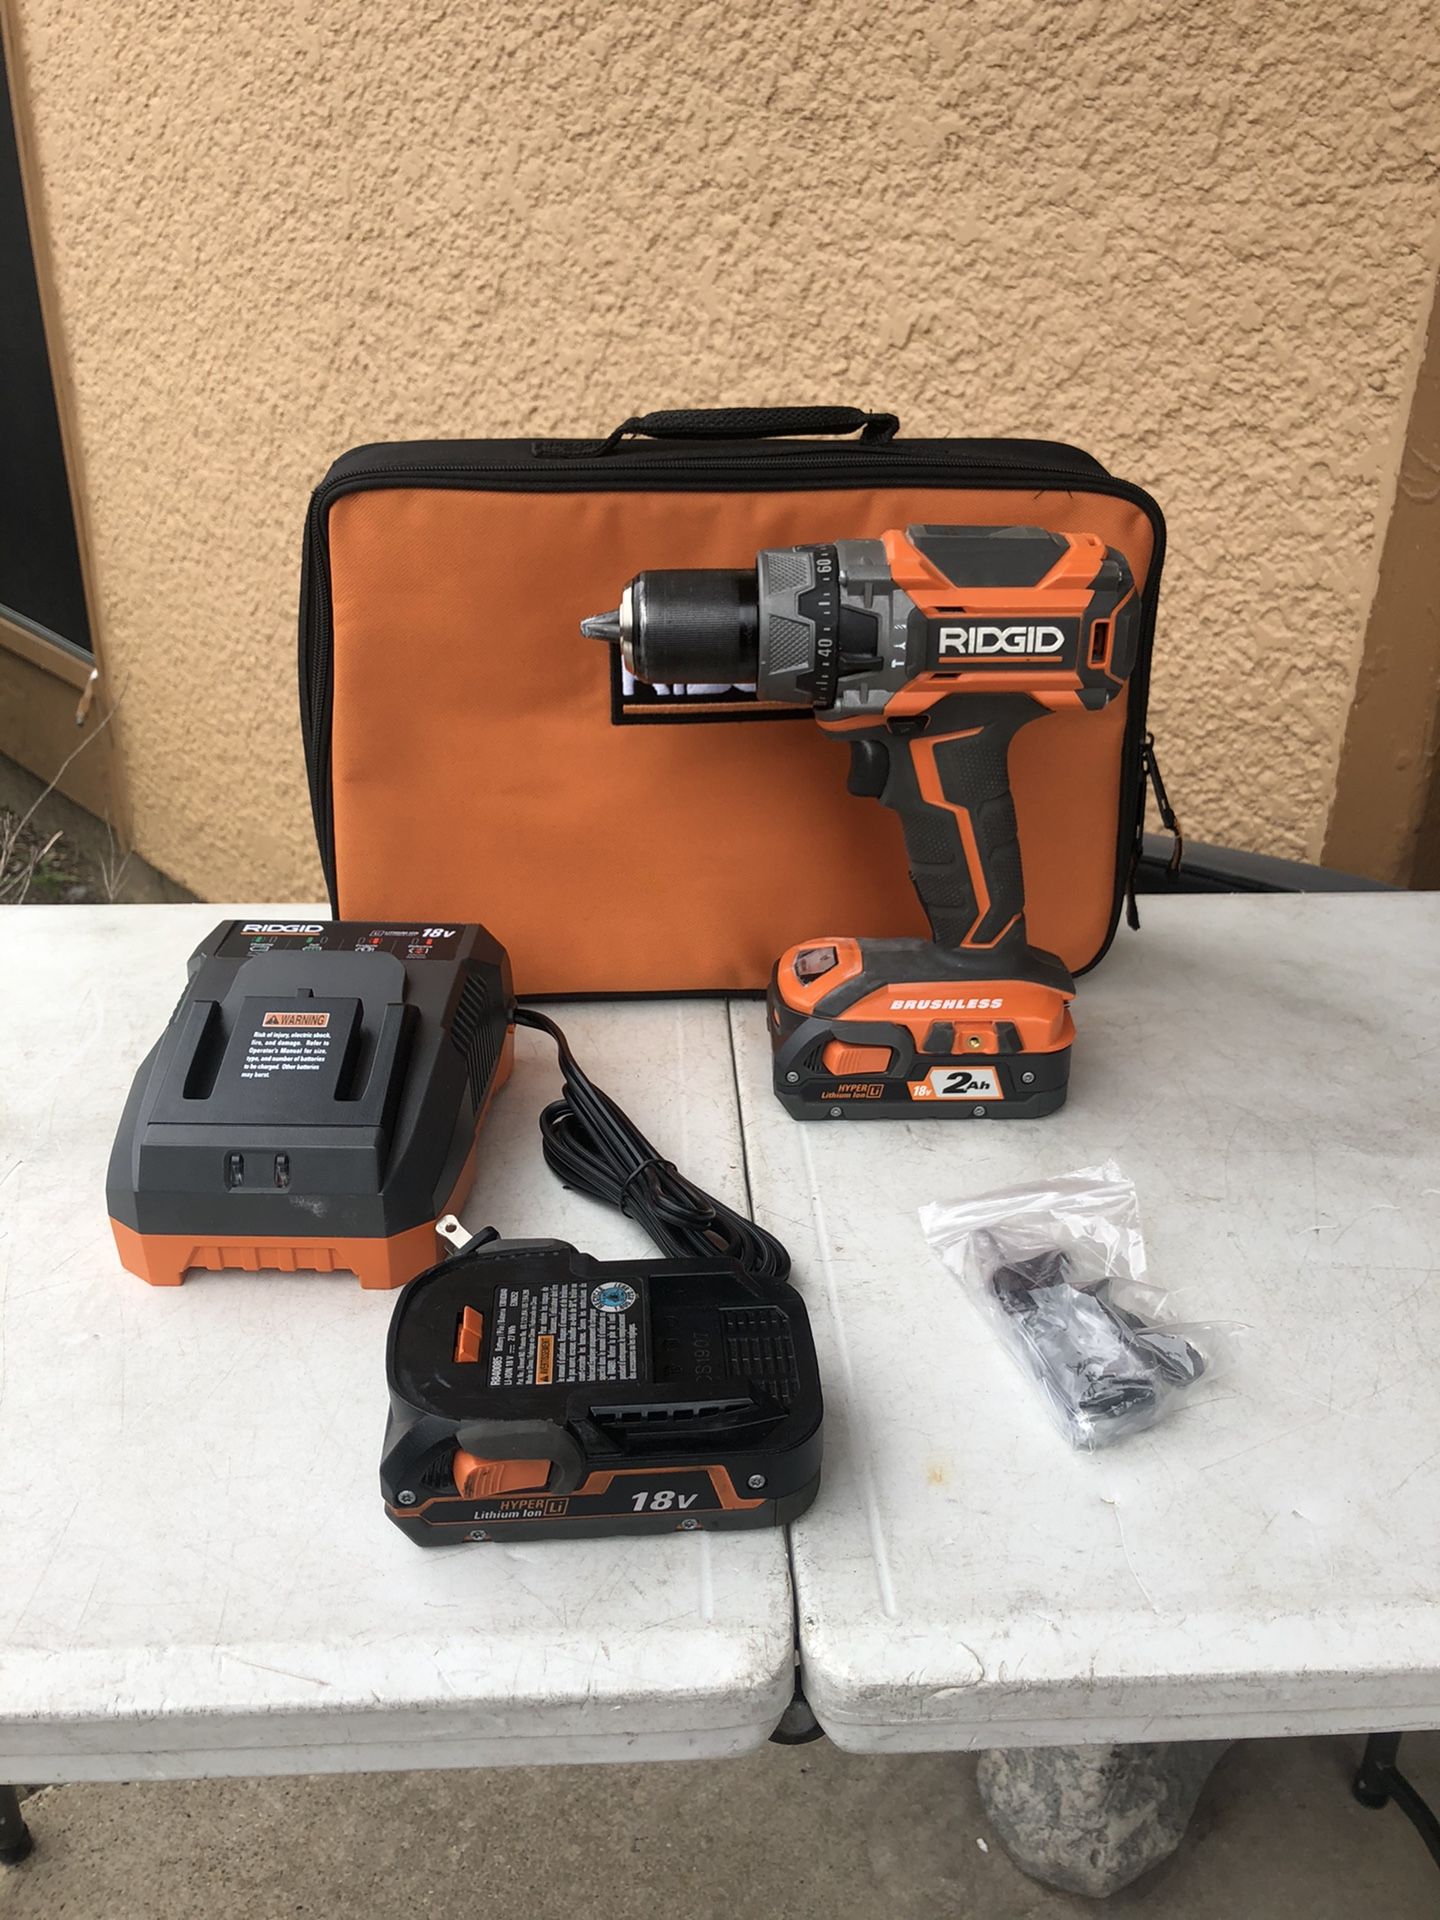 Ridgid 18volts X5 Hammer drill two battery’s one charged perfect condition $125